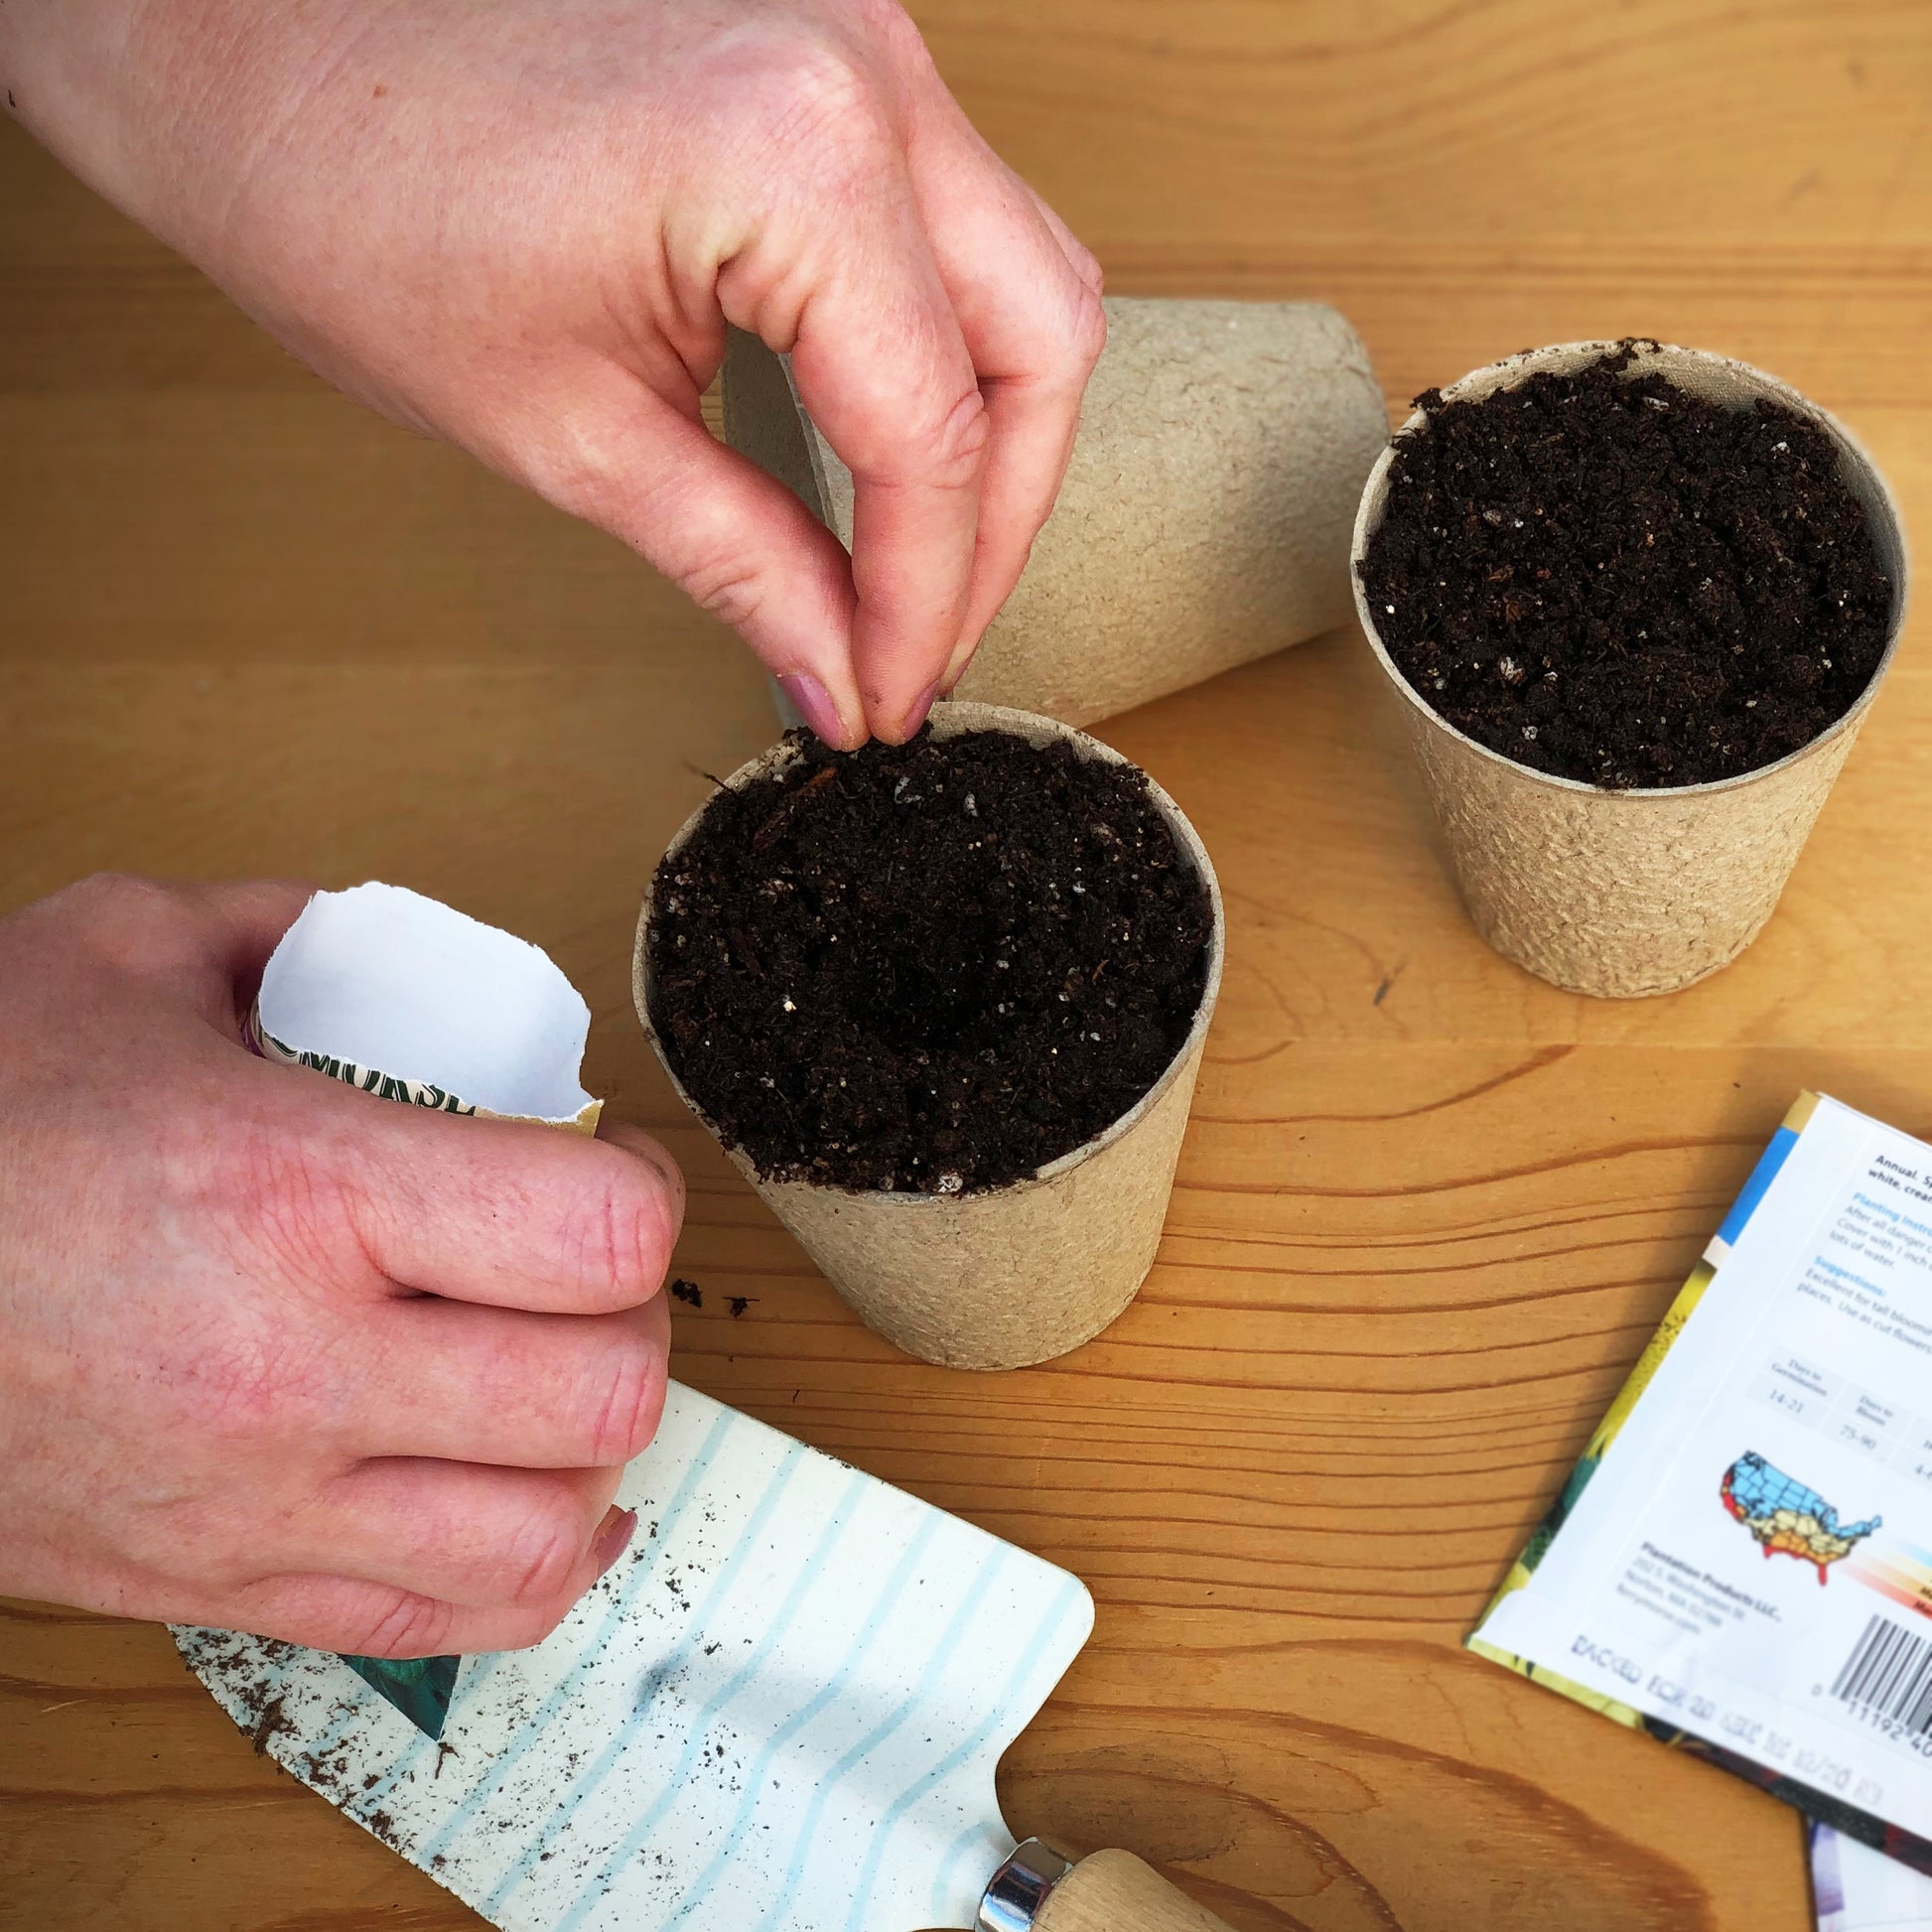 Planting Mild Jalapeno Pepper Seeds into Jiffy biodegradable peat pots for seed starting indoors.